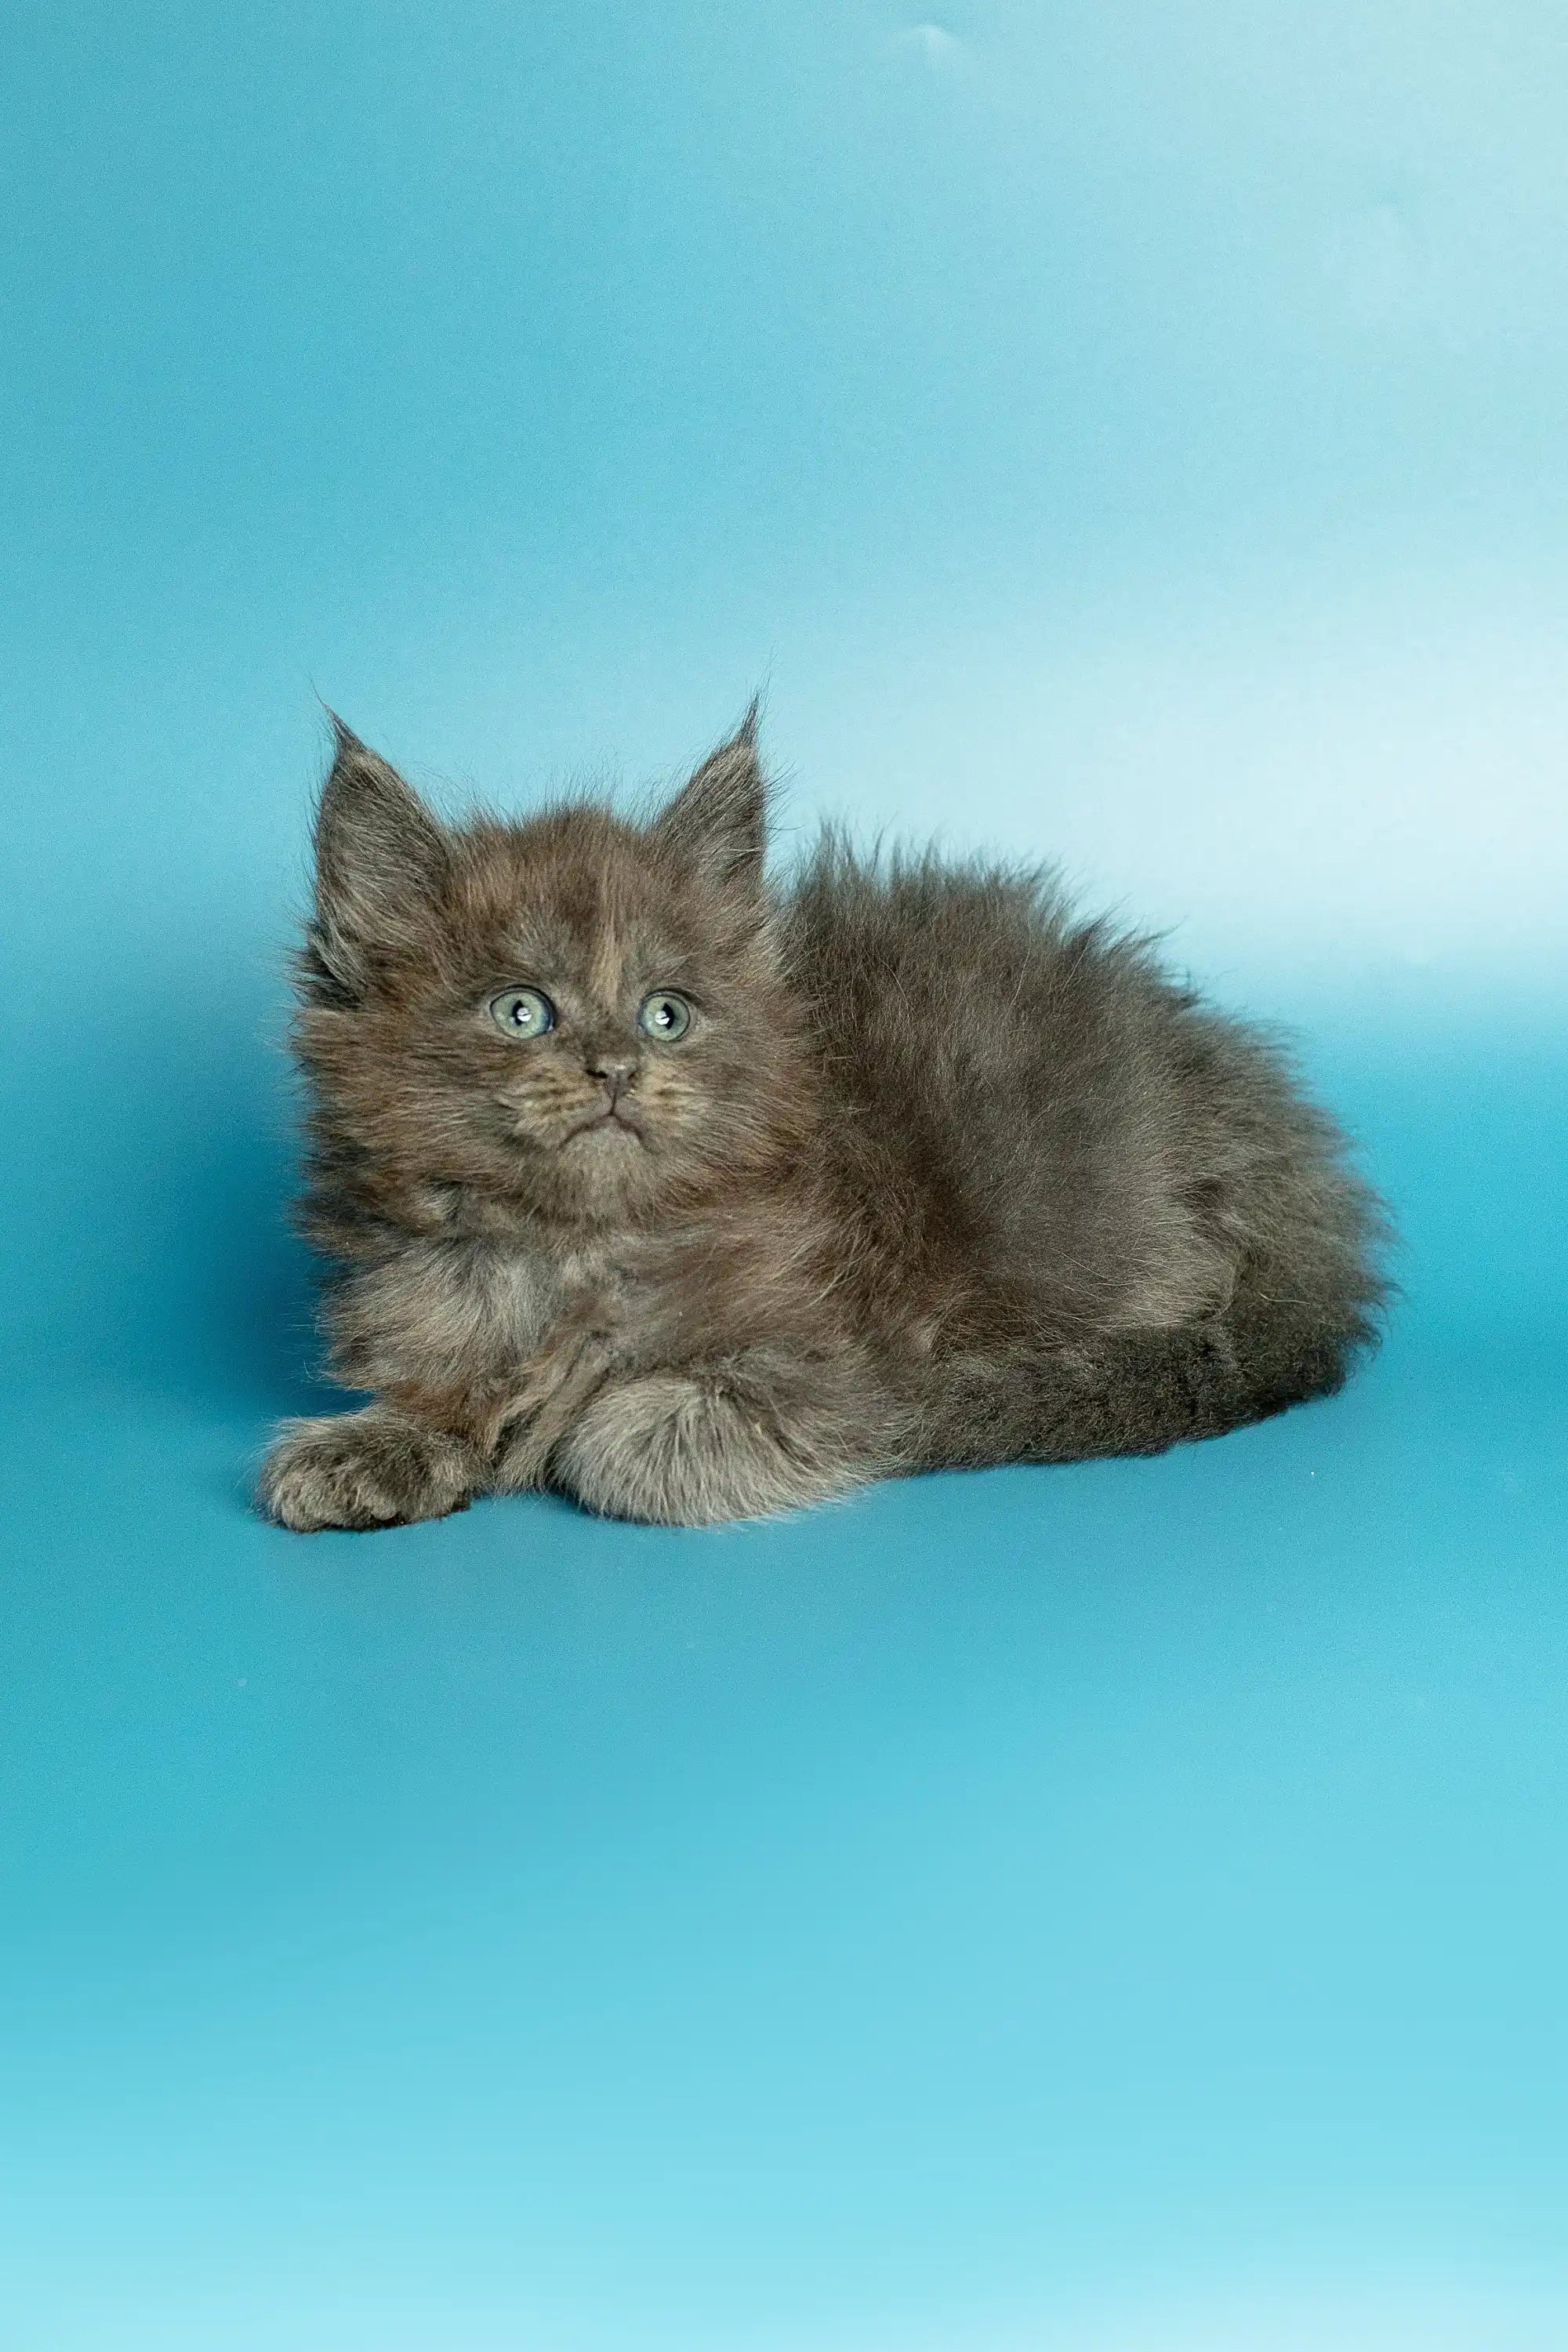 Maine Coon Kittens for Sale May | Kitten